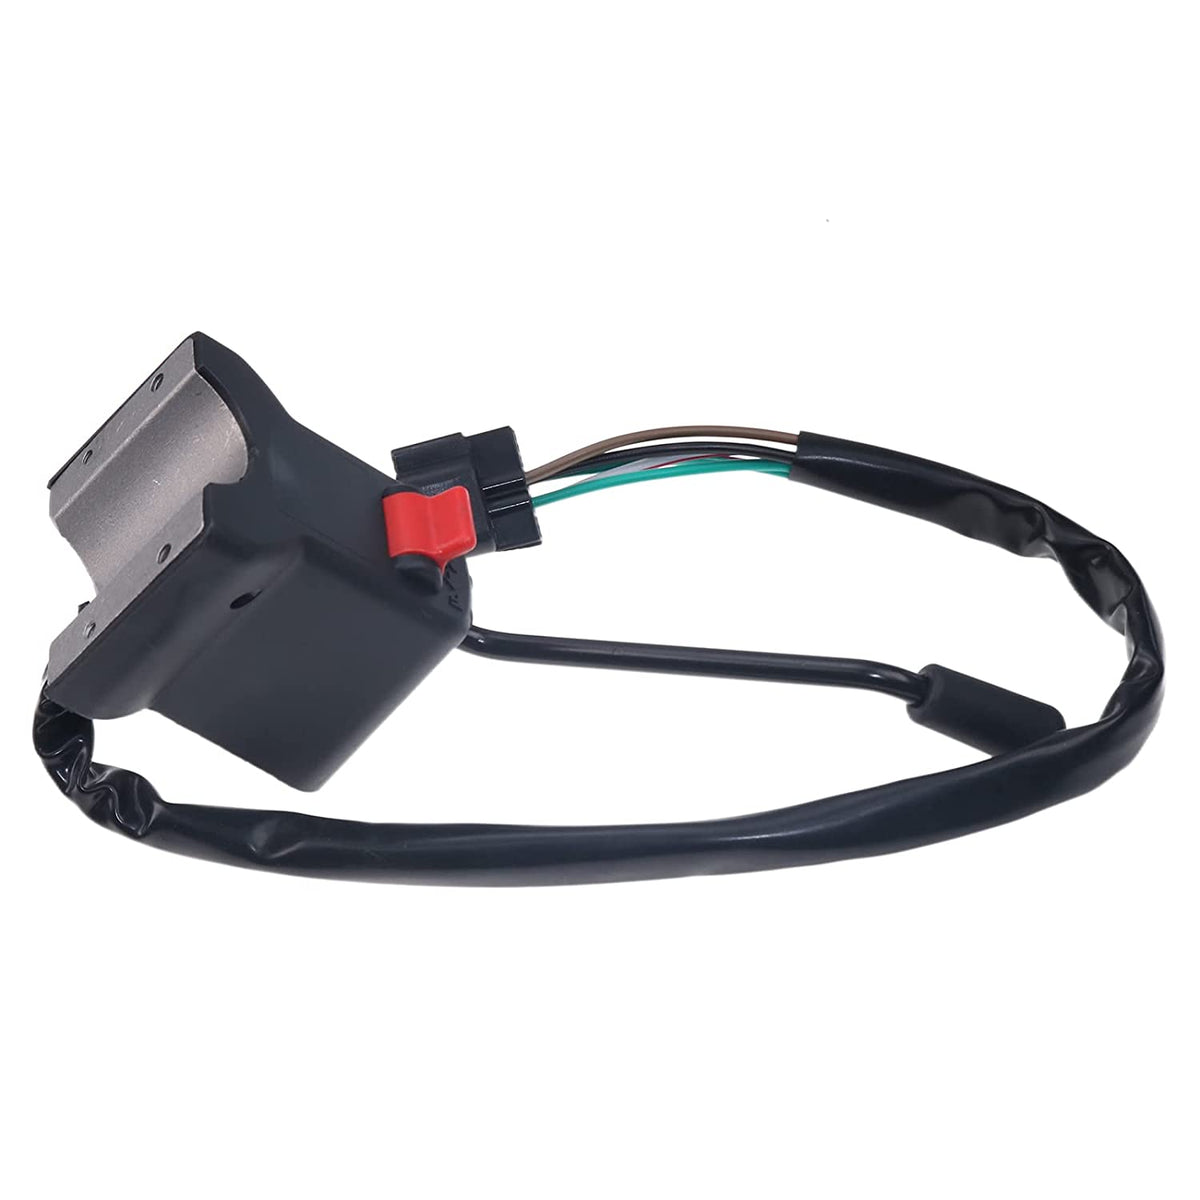 Forward Neutral Reverse Gear Switch 91306-25200 91406-32800 91306-45200 Compatible with Mitsubishi Forklift GP25-K GP25 Series - KUDUPARTS